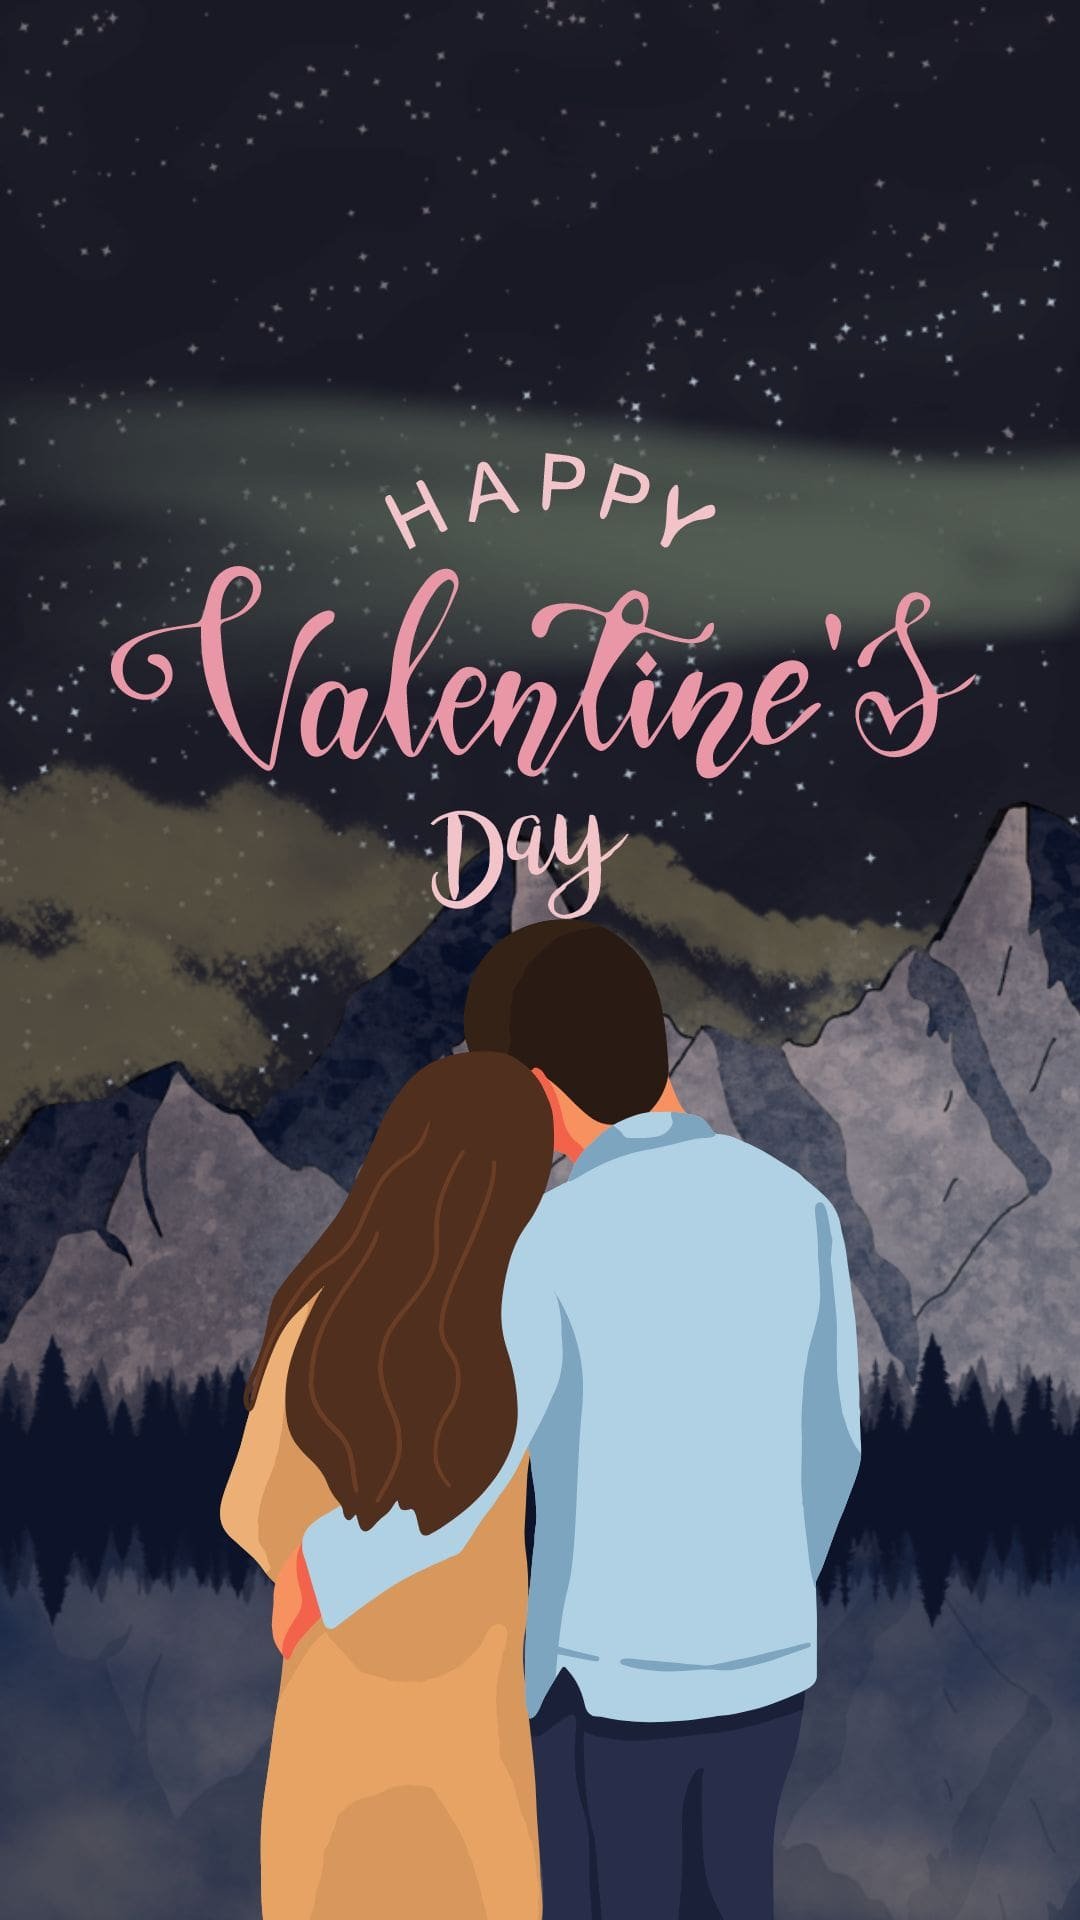 Valentine's Day Wallpapers For Iphone Min